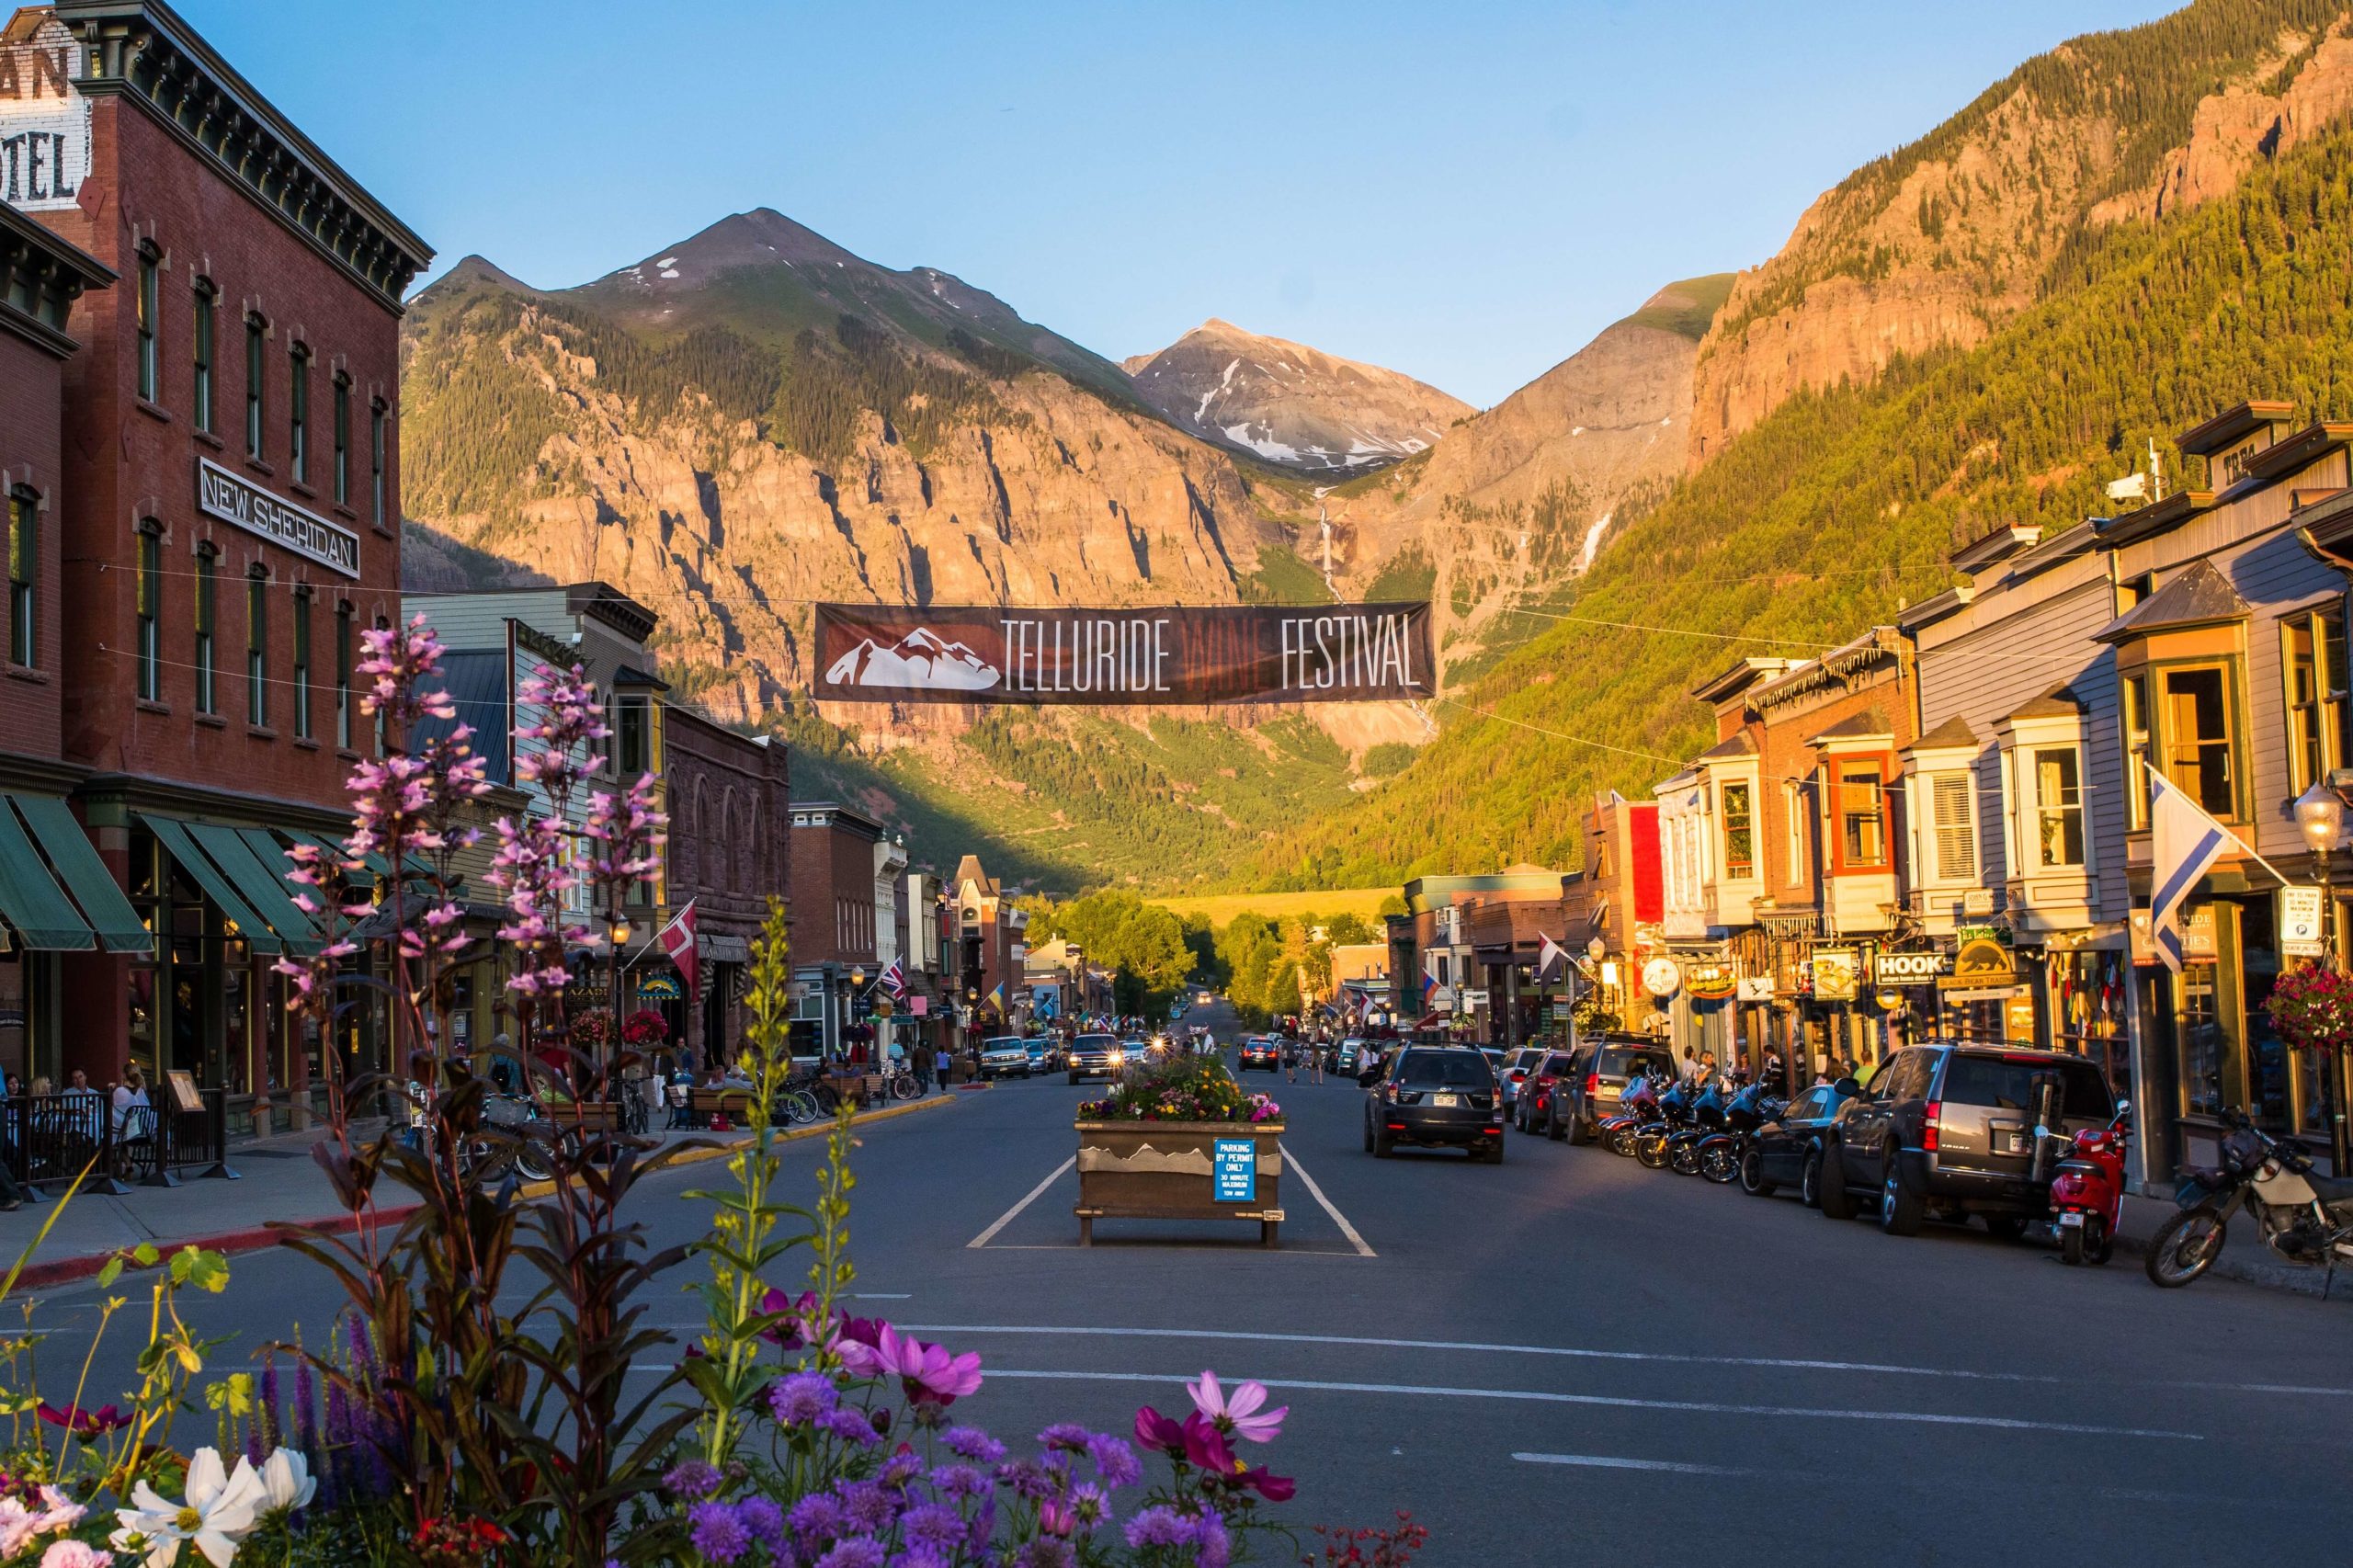 The wine festival. One of the best Telluride events.